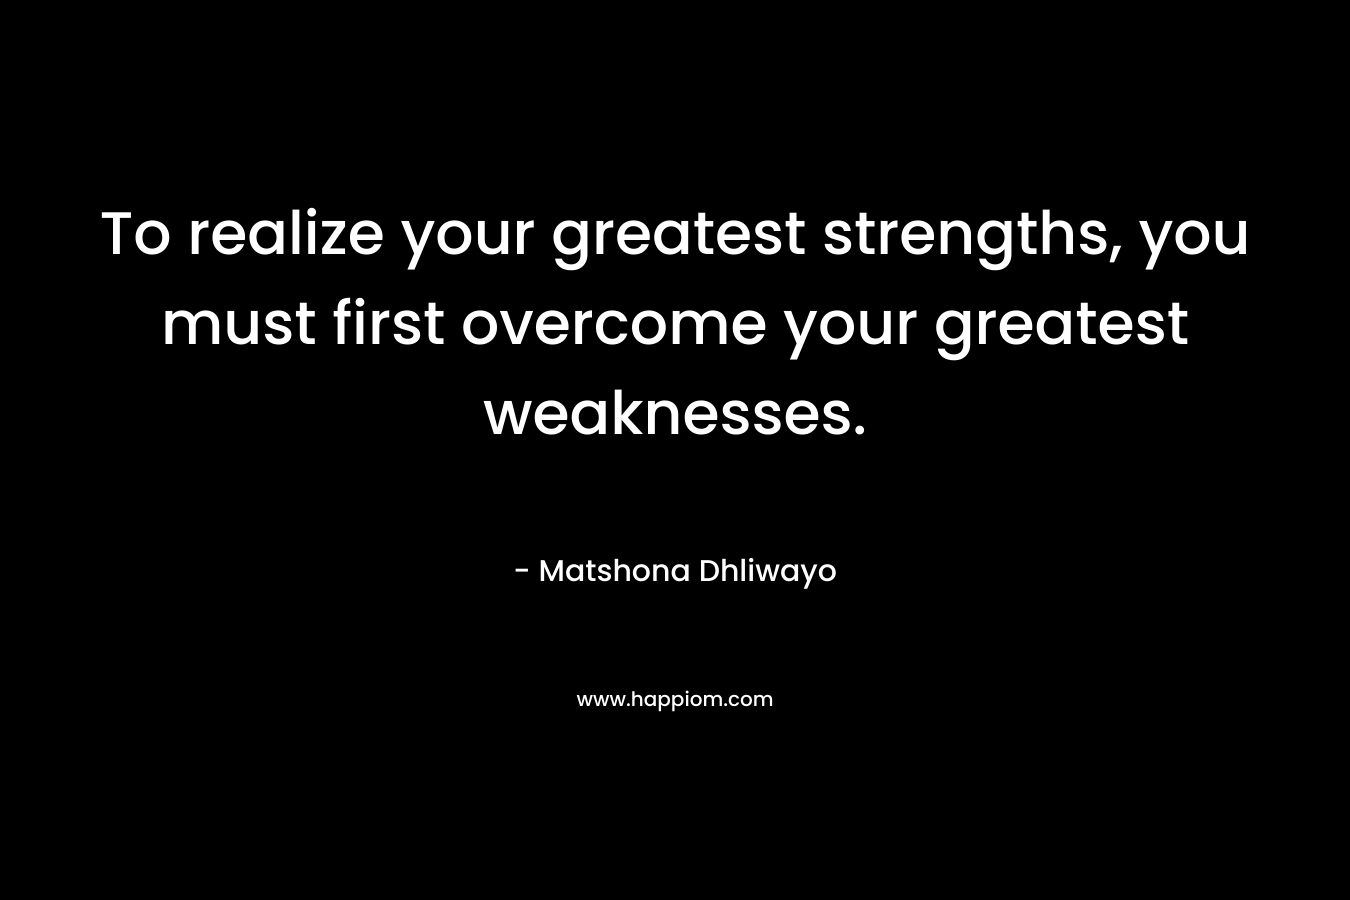 To realize your greatest strengths, you must first overcome your greatest weaknesses.